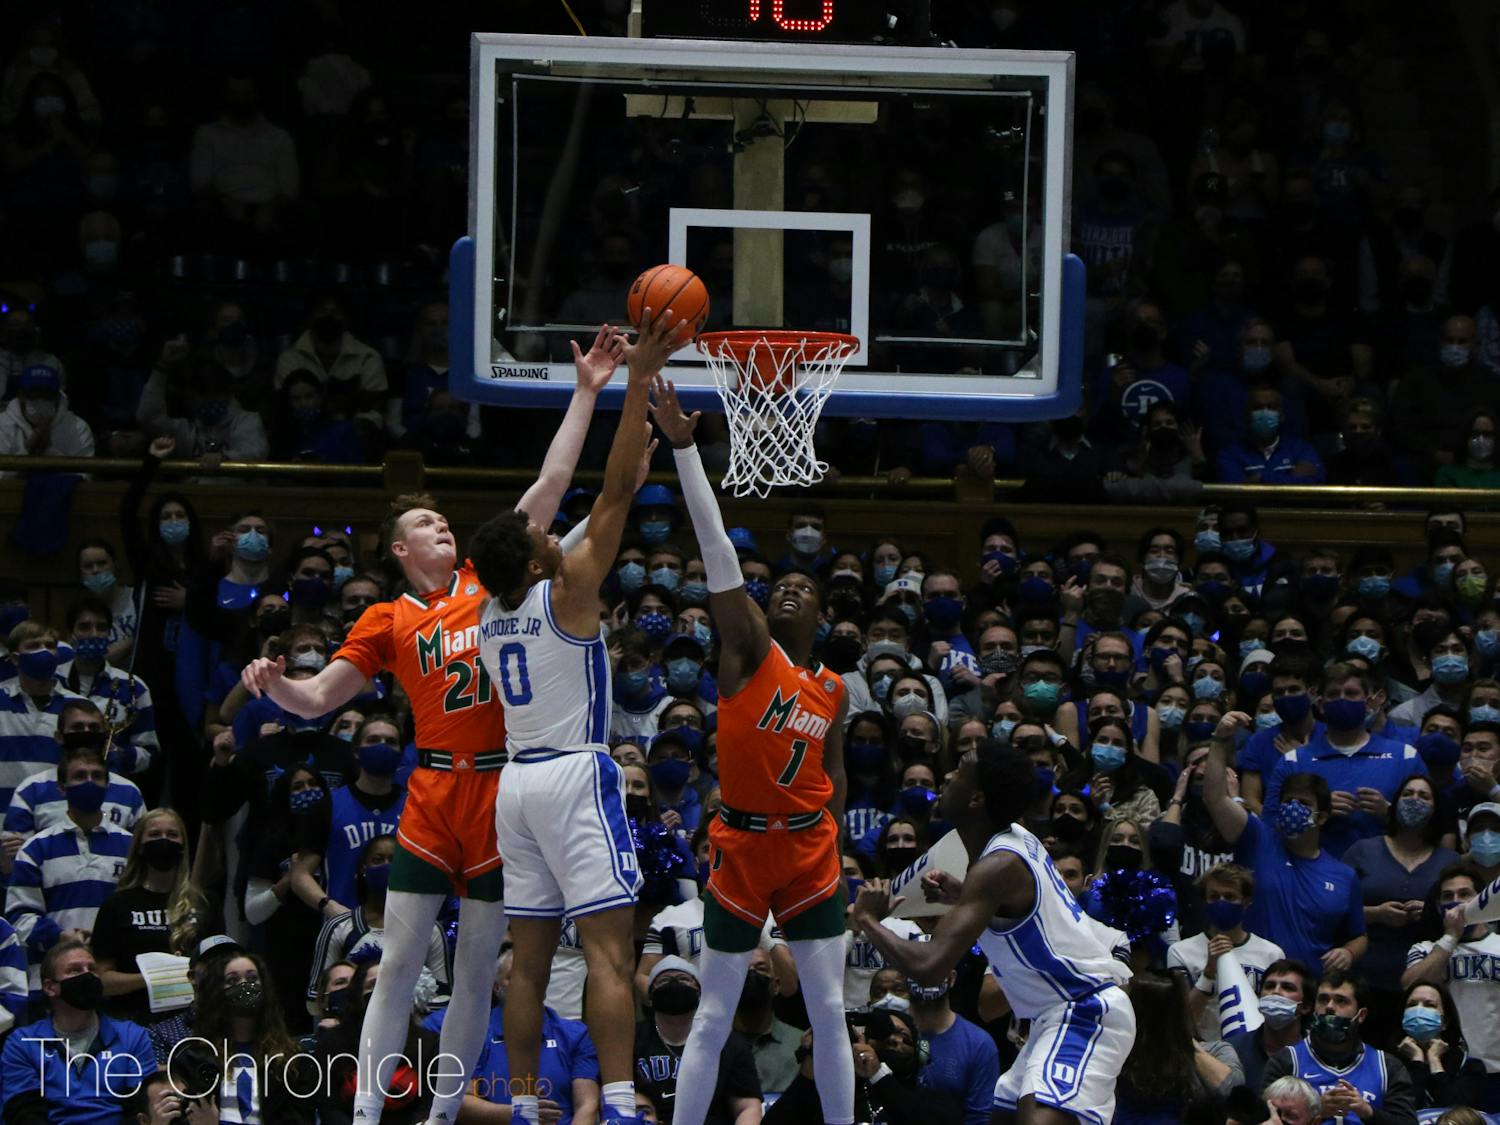 Miami's 76-74 win at Duke helped force a tie atop this week's rankings.